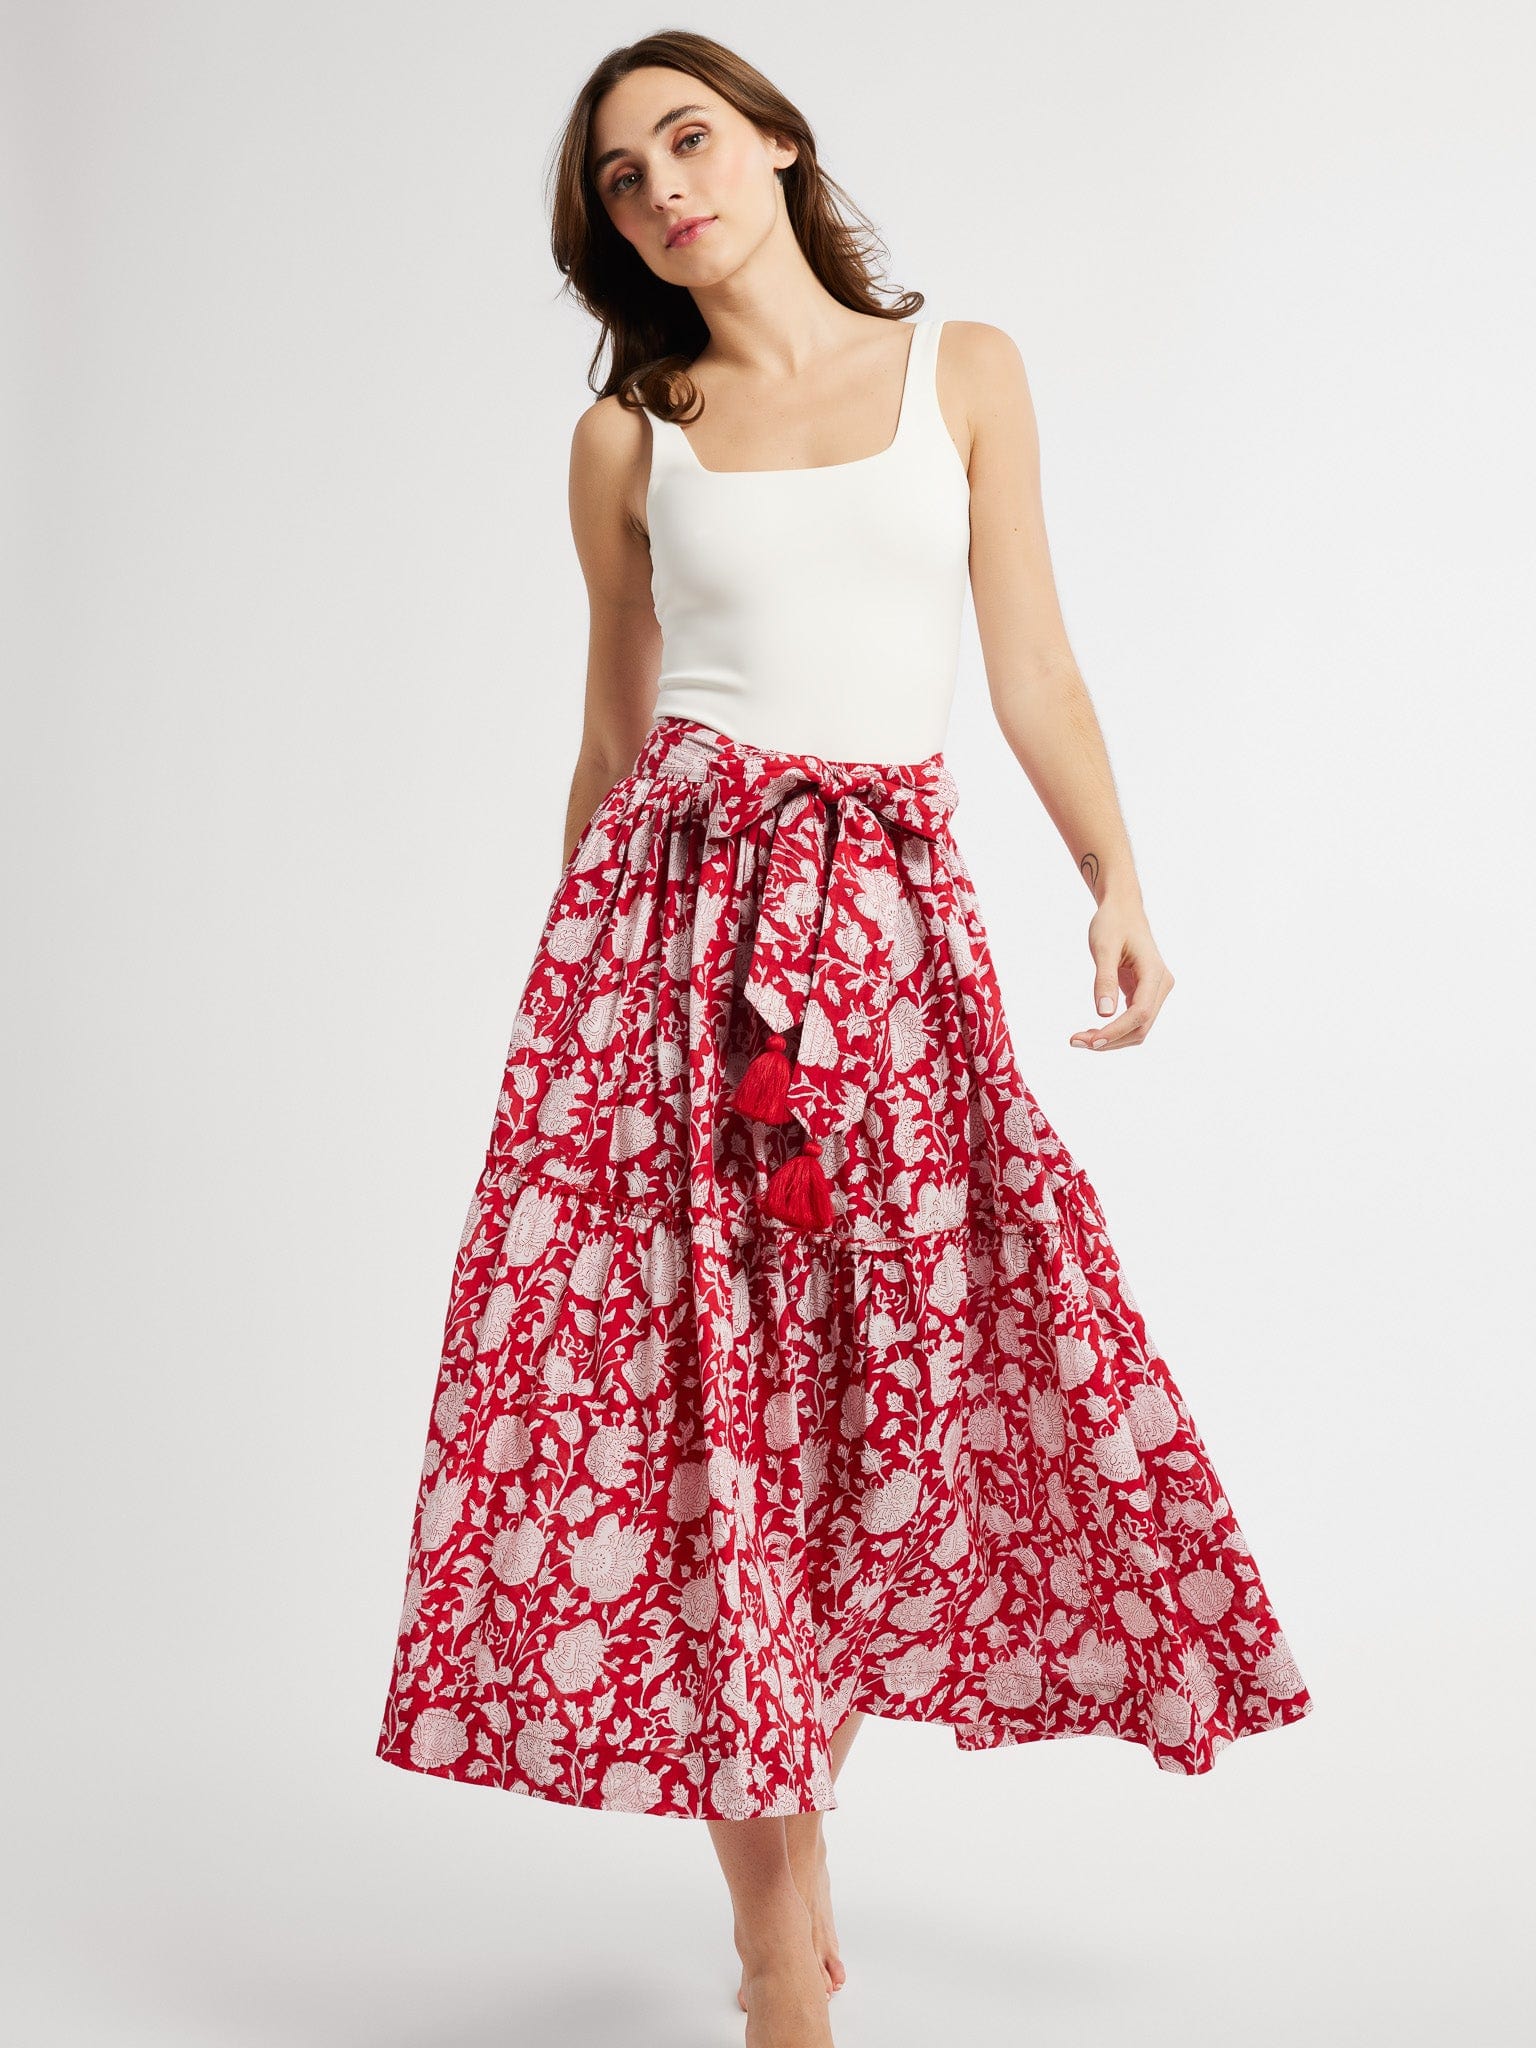 MILLE Clothing Françoise Skirt in Red Zinnia